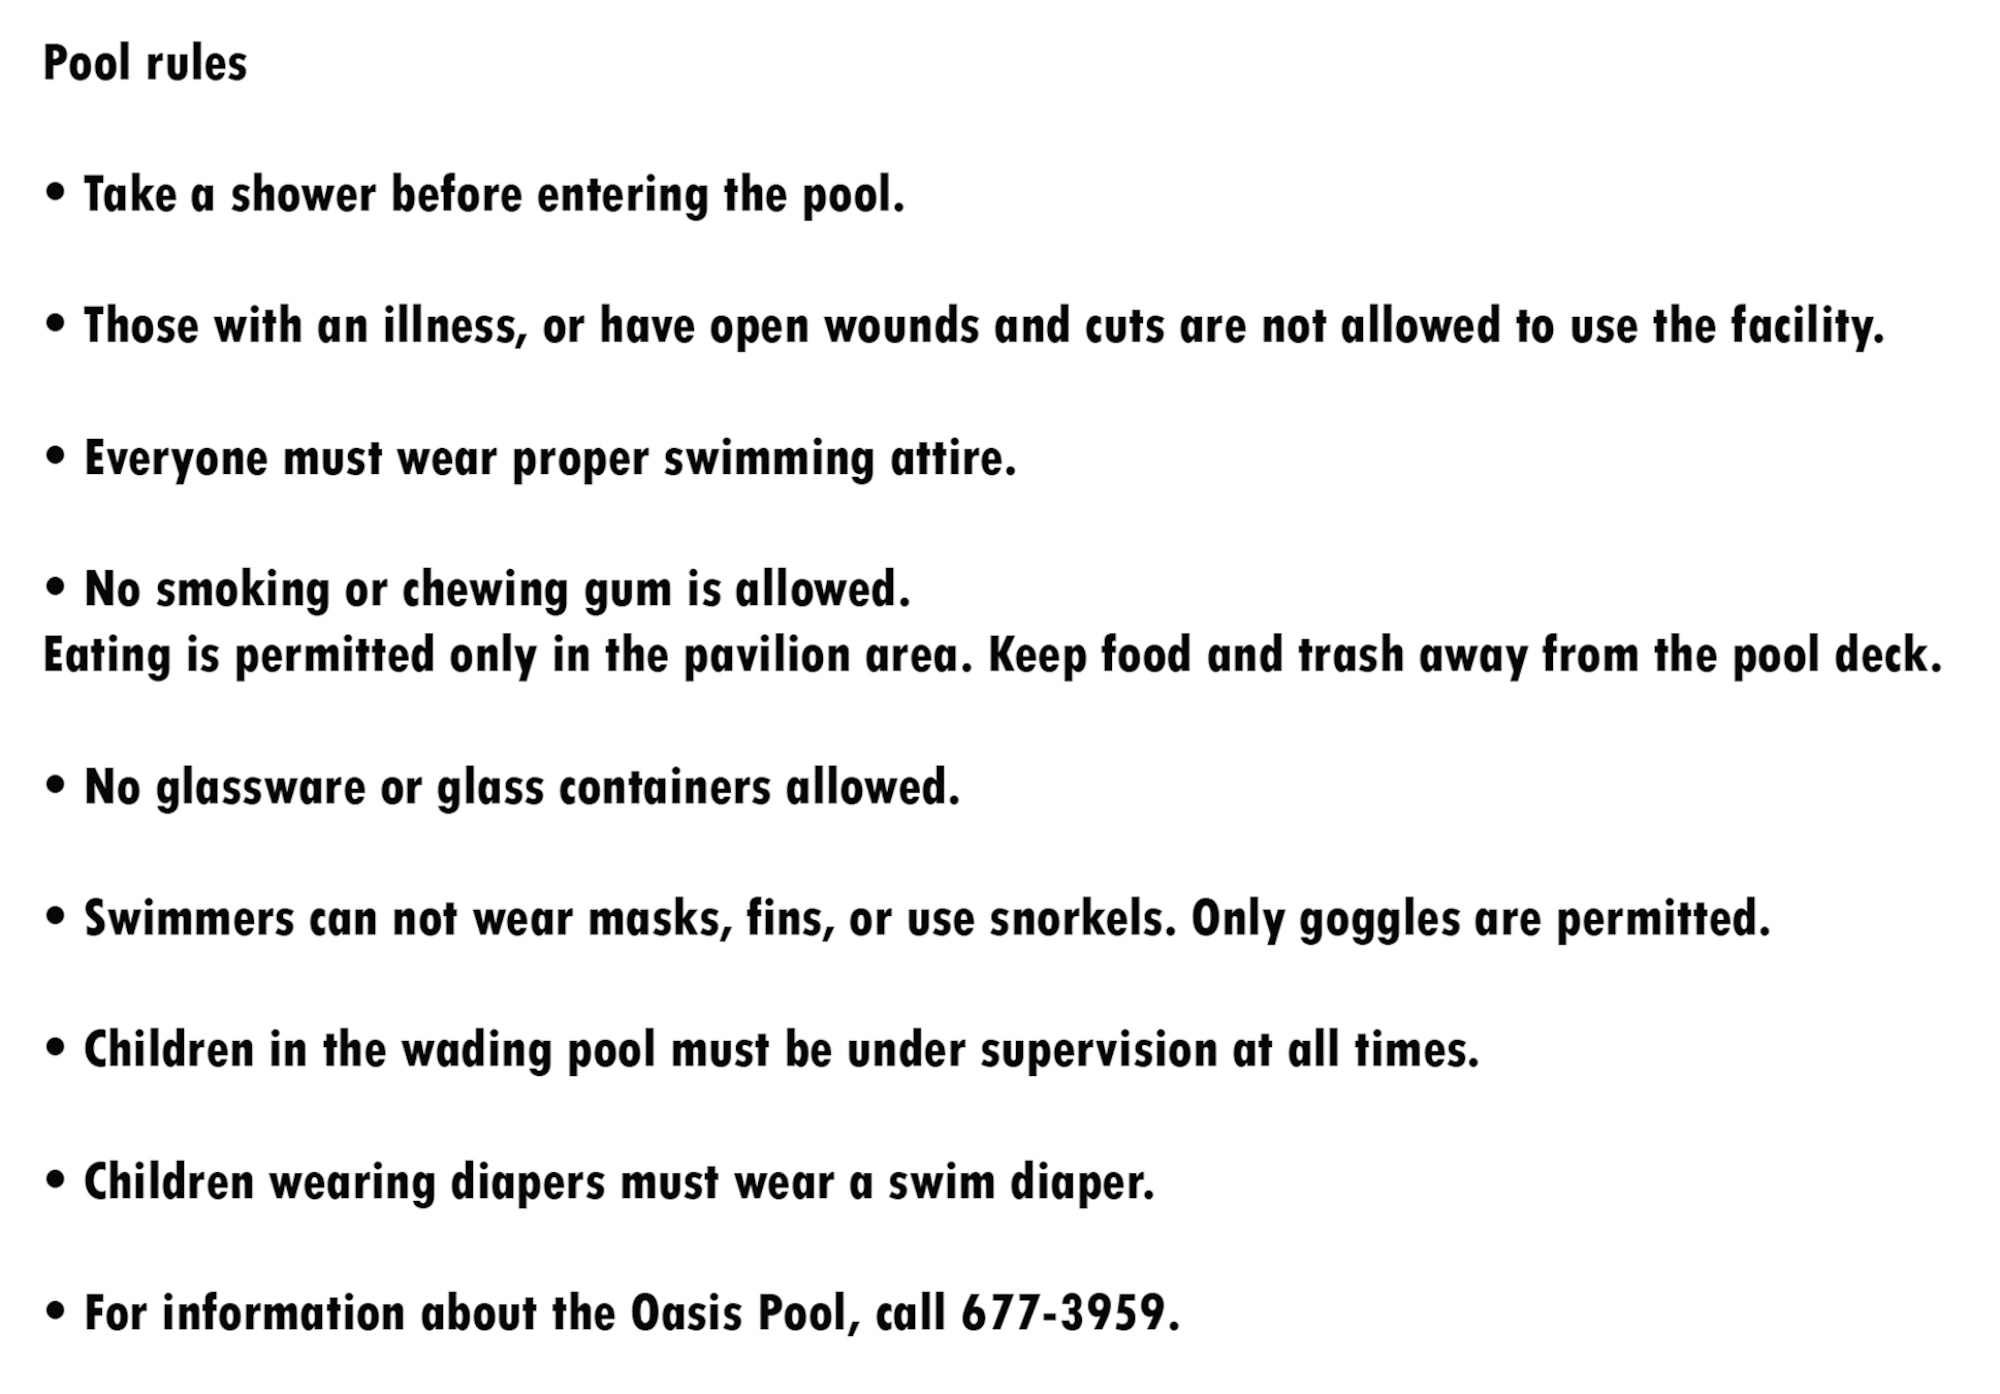 Rules for the Oasis Pool